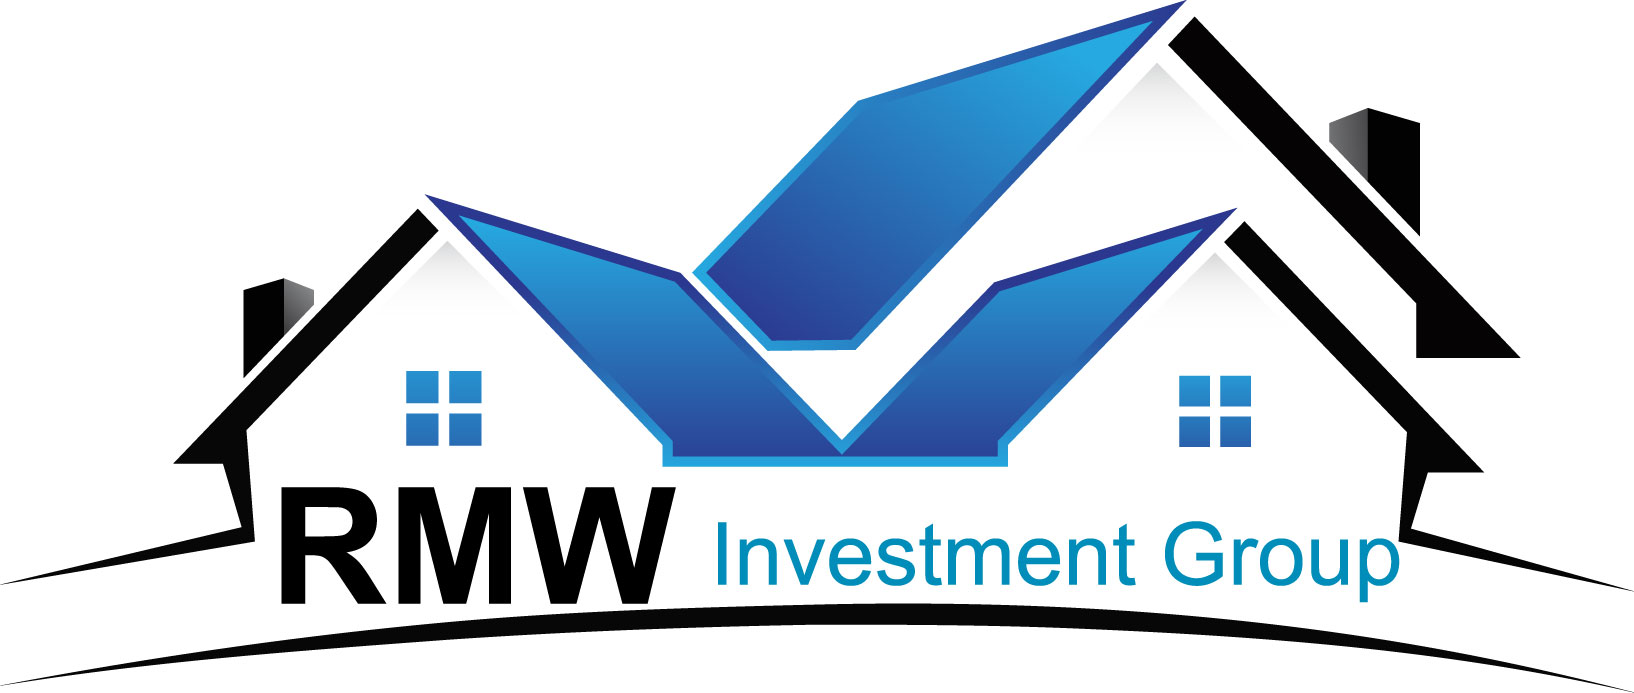 RMW Investment Group